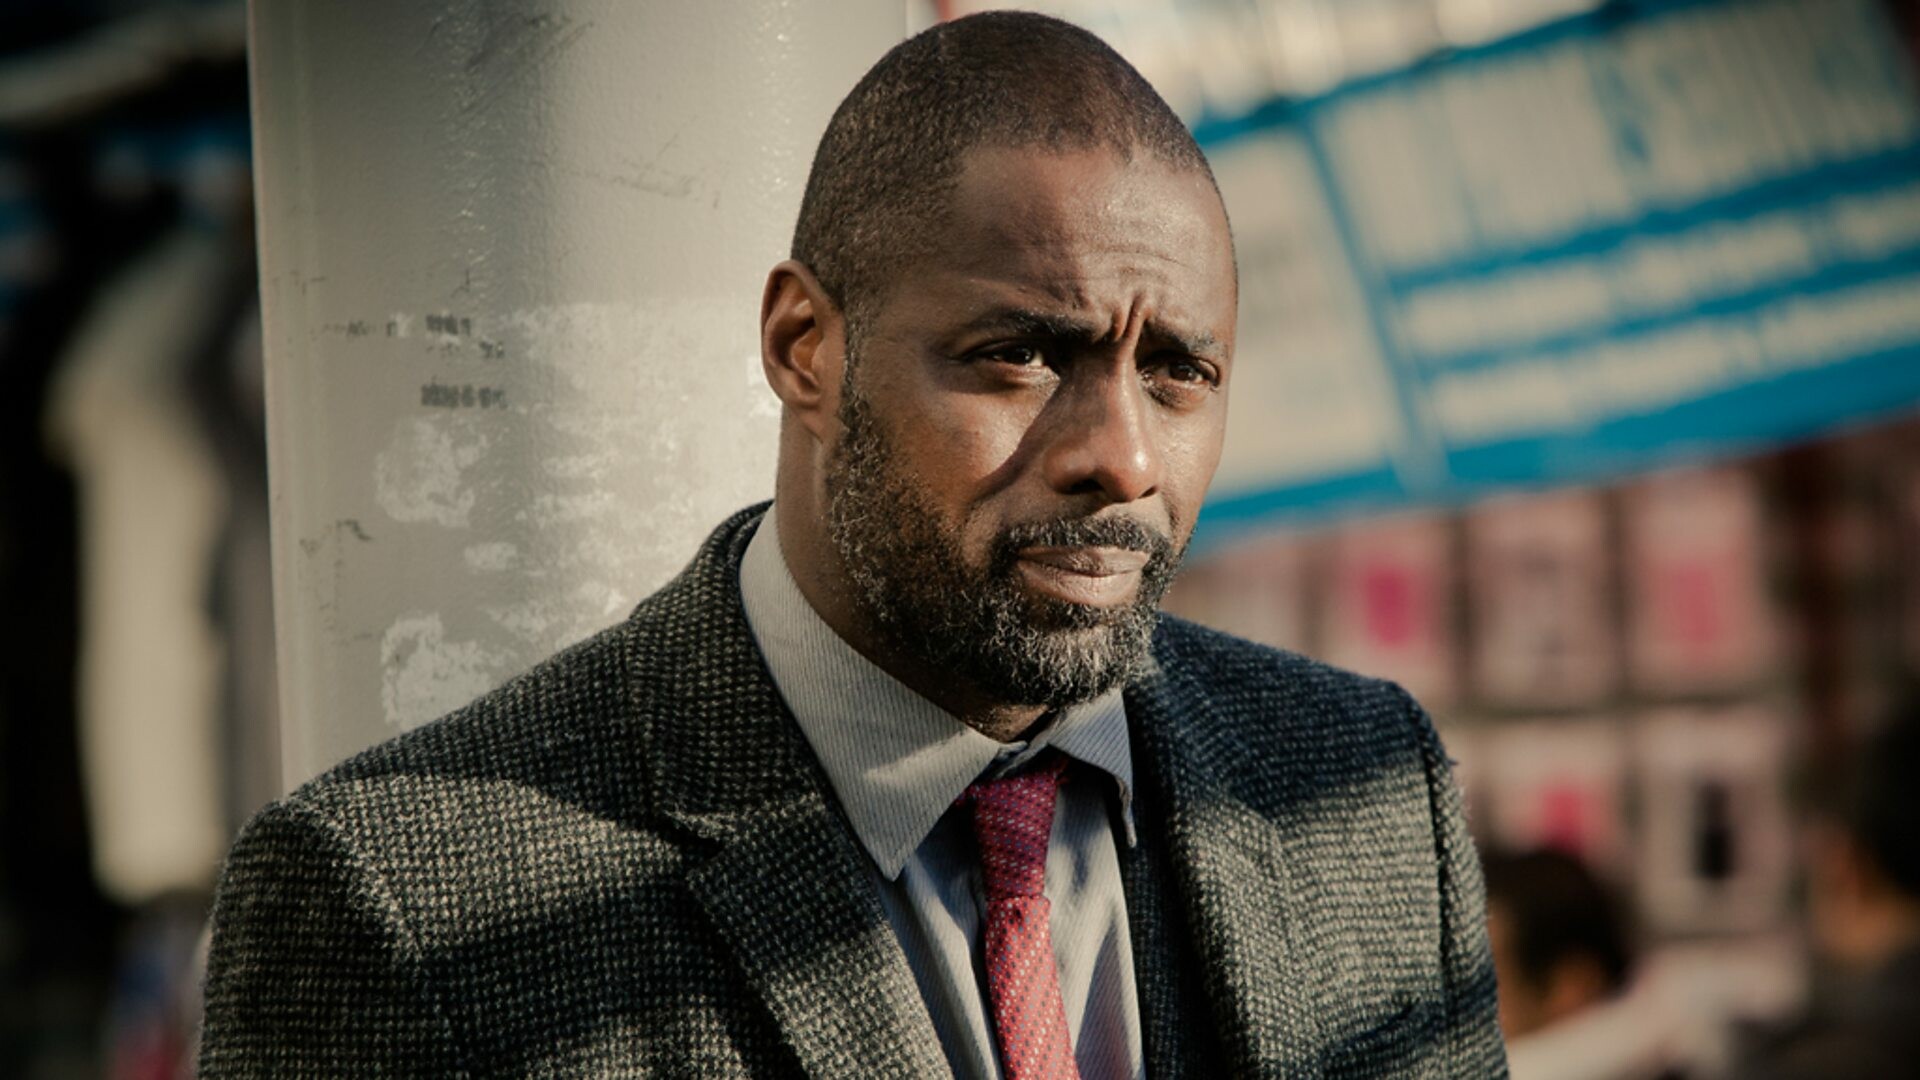 Luther (TV series): The fifth season of four episodes premiered on 1 January 2019. 1920x1080 Full HD Background.